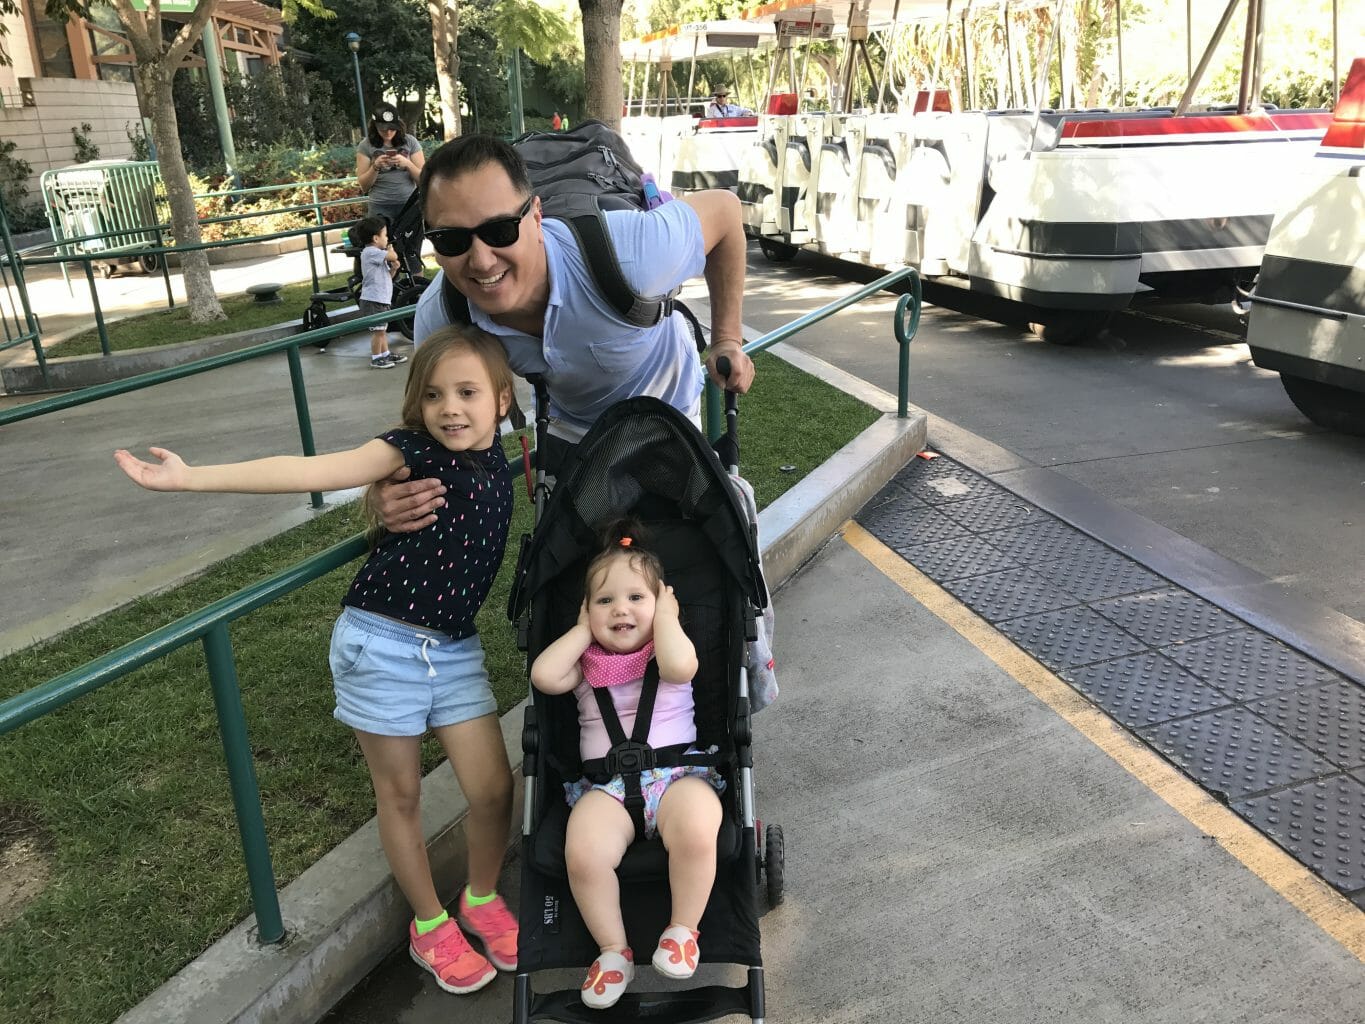 Our family waiting for the tram to take us in to Disney's Anaheim Resort.